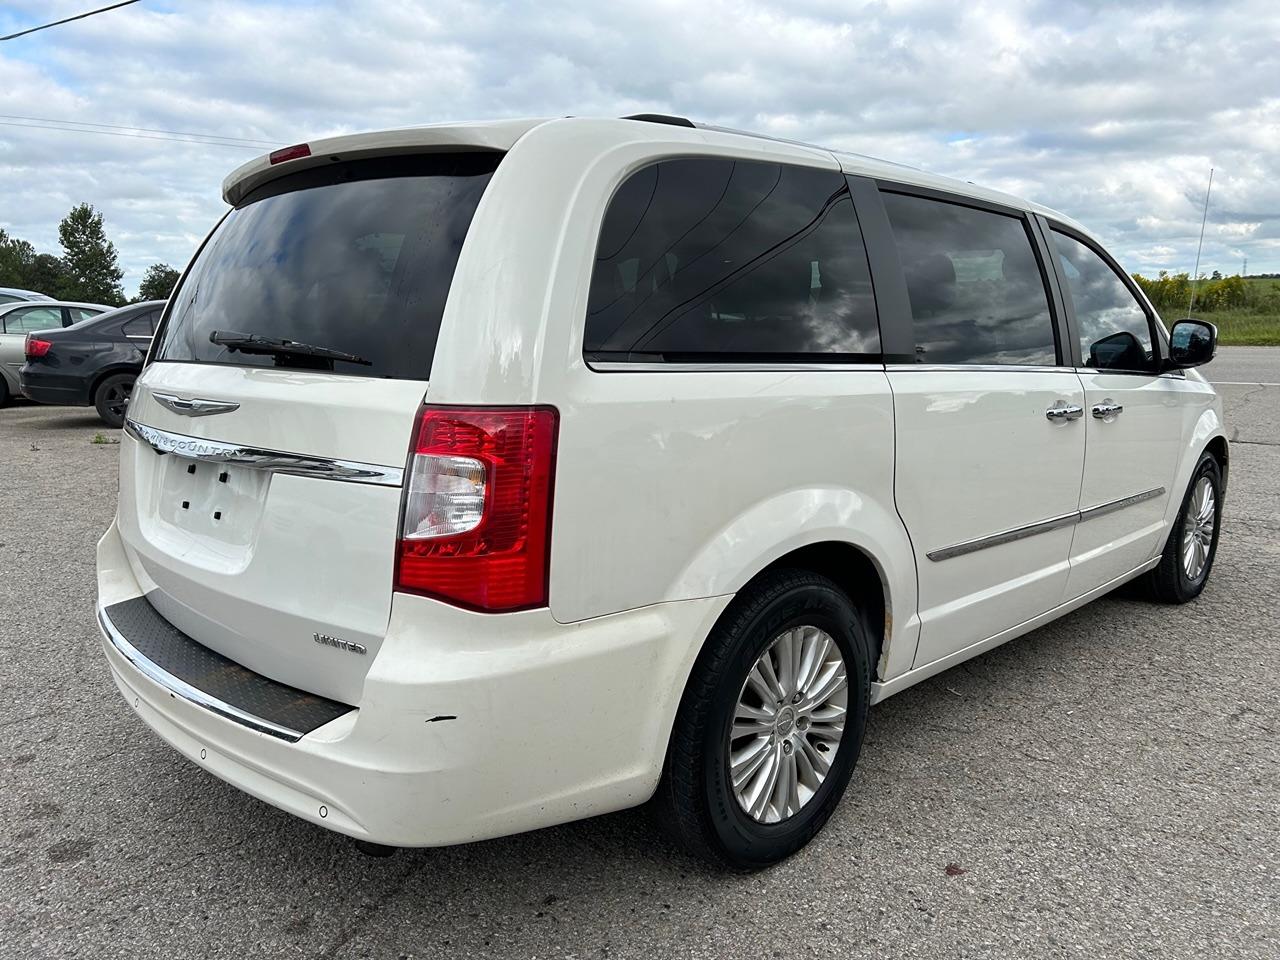 2012 Chrysler Town & Country Ltd*Runs&Drive Great*7 Pass*226 Kms*No Accidents* - Photo #5